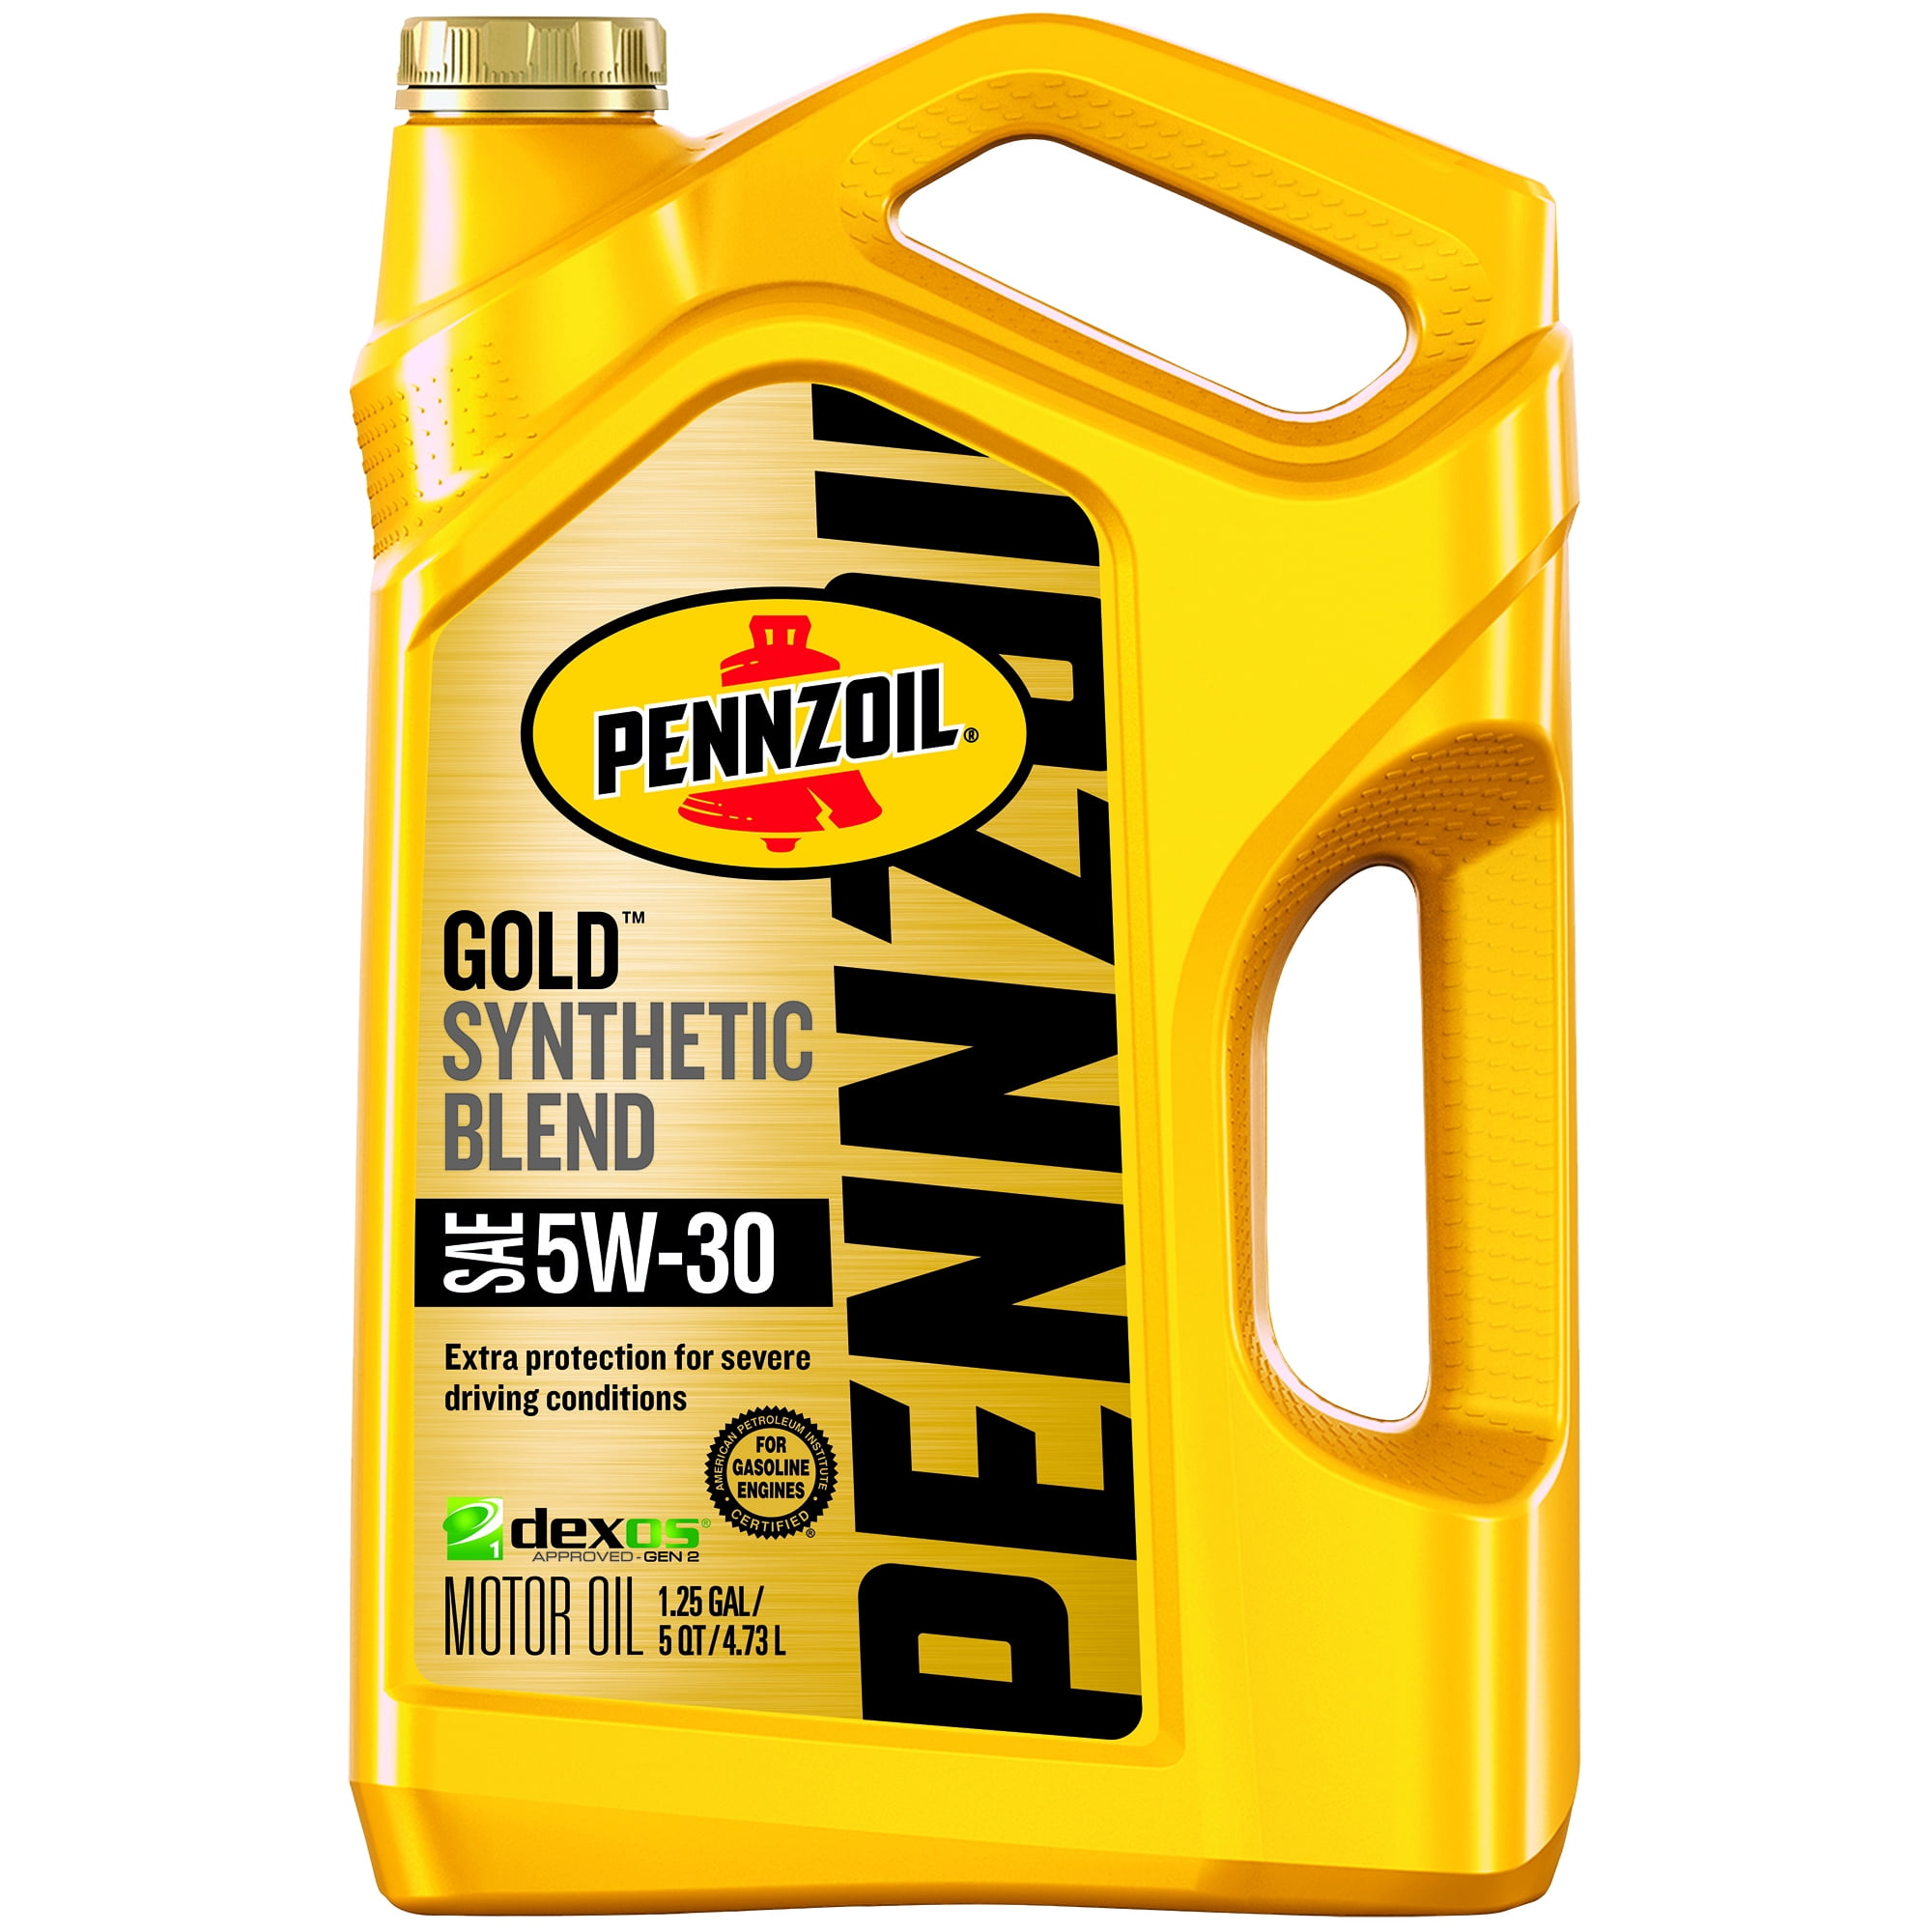 pennzoil-gold-synthetic-blend-5w-30